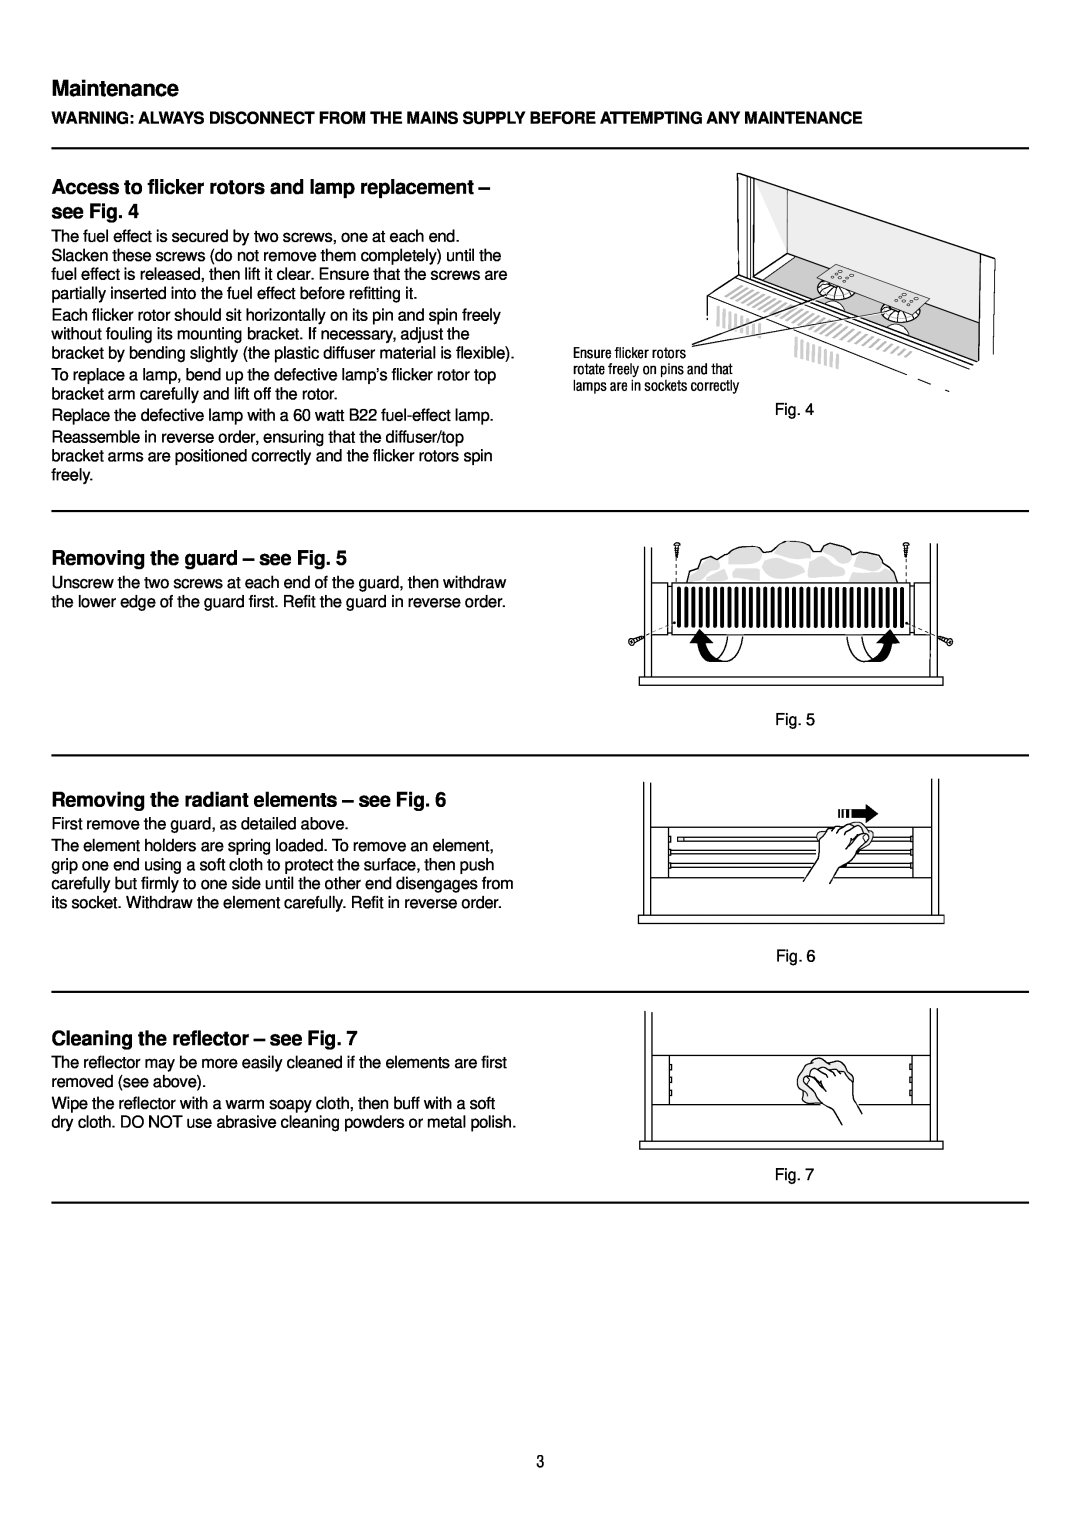 Dimplex 316 CHE manual Maintenance, Removing the guard - see Fig, Removing the radiant elements - see Fig 